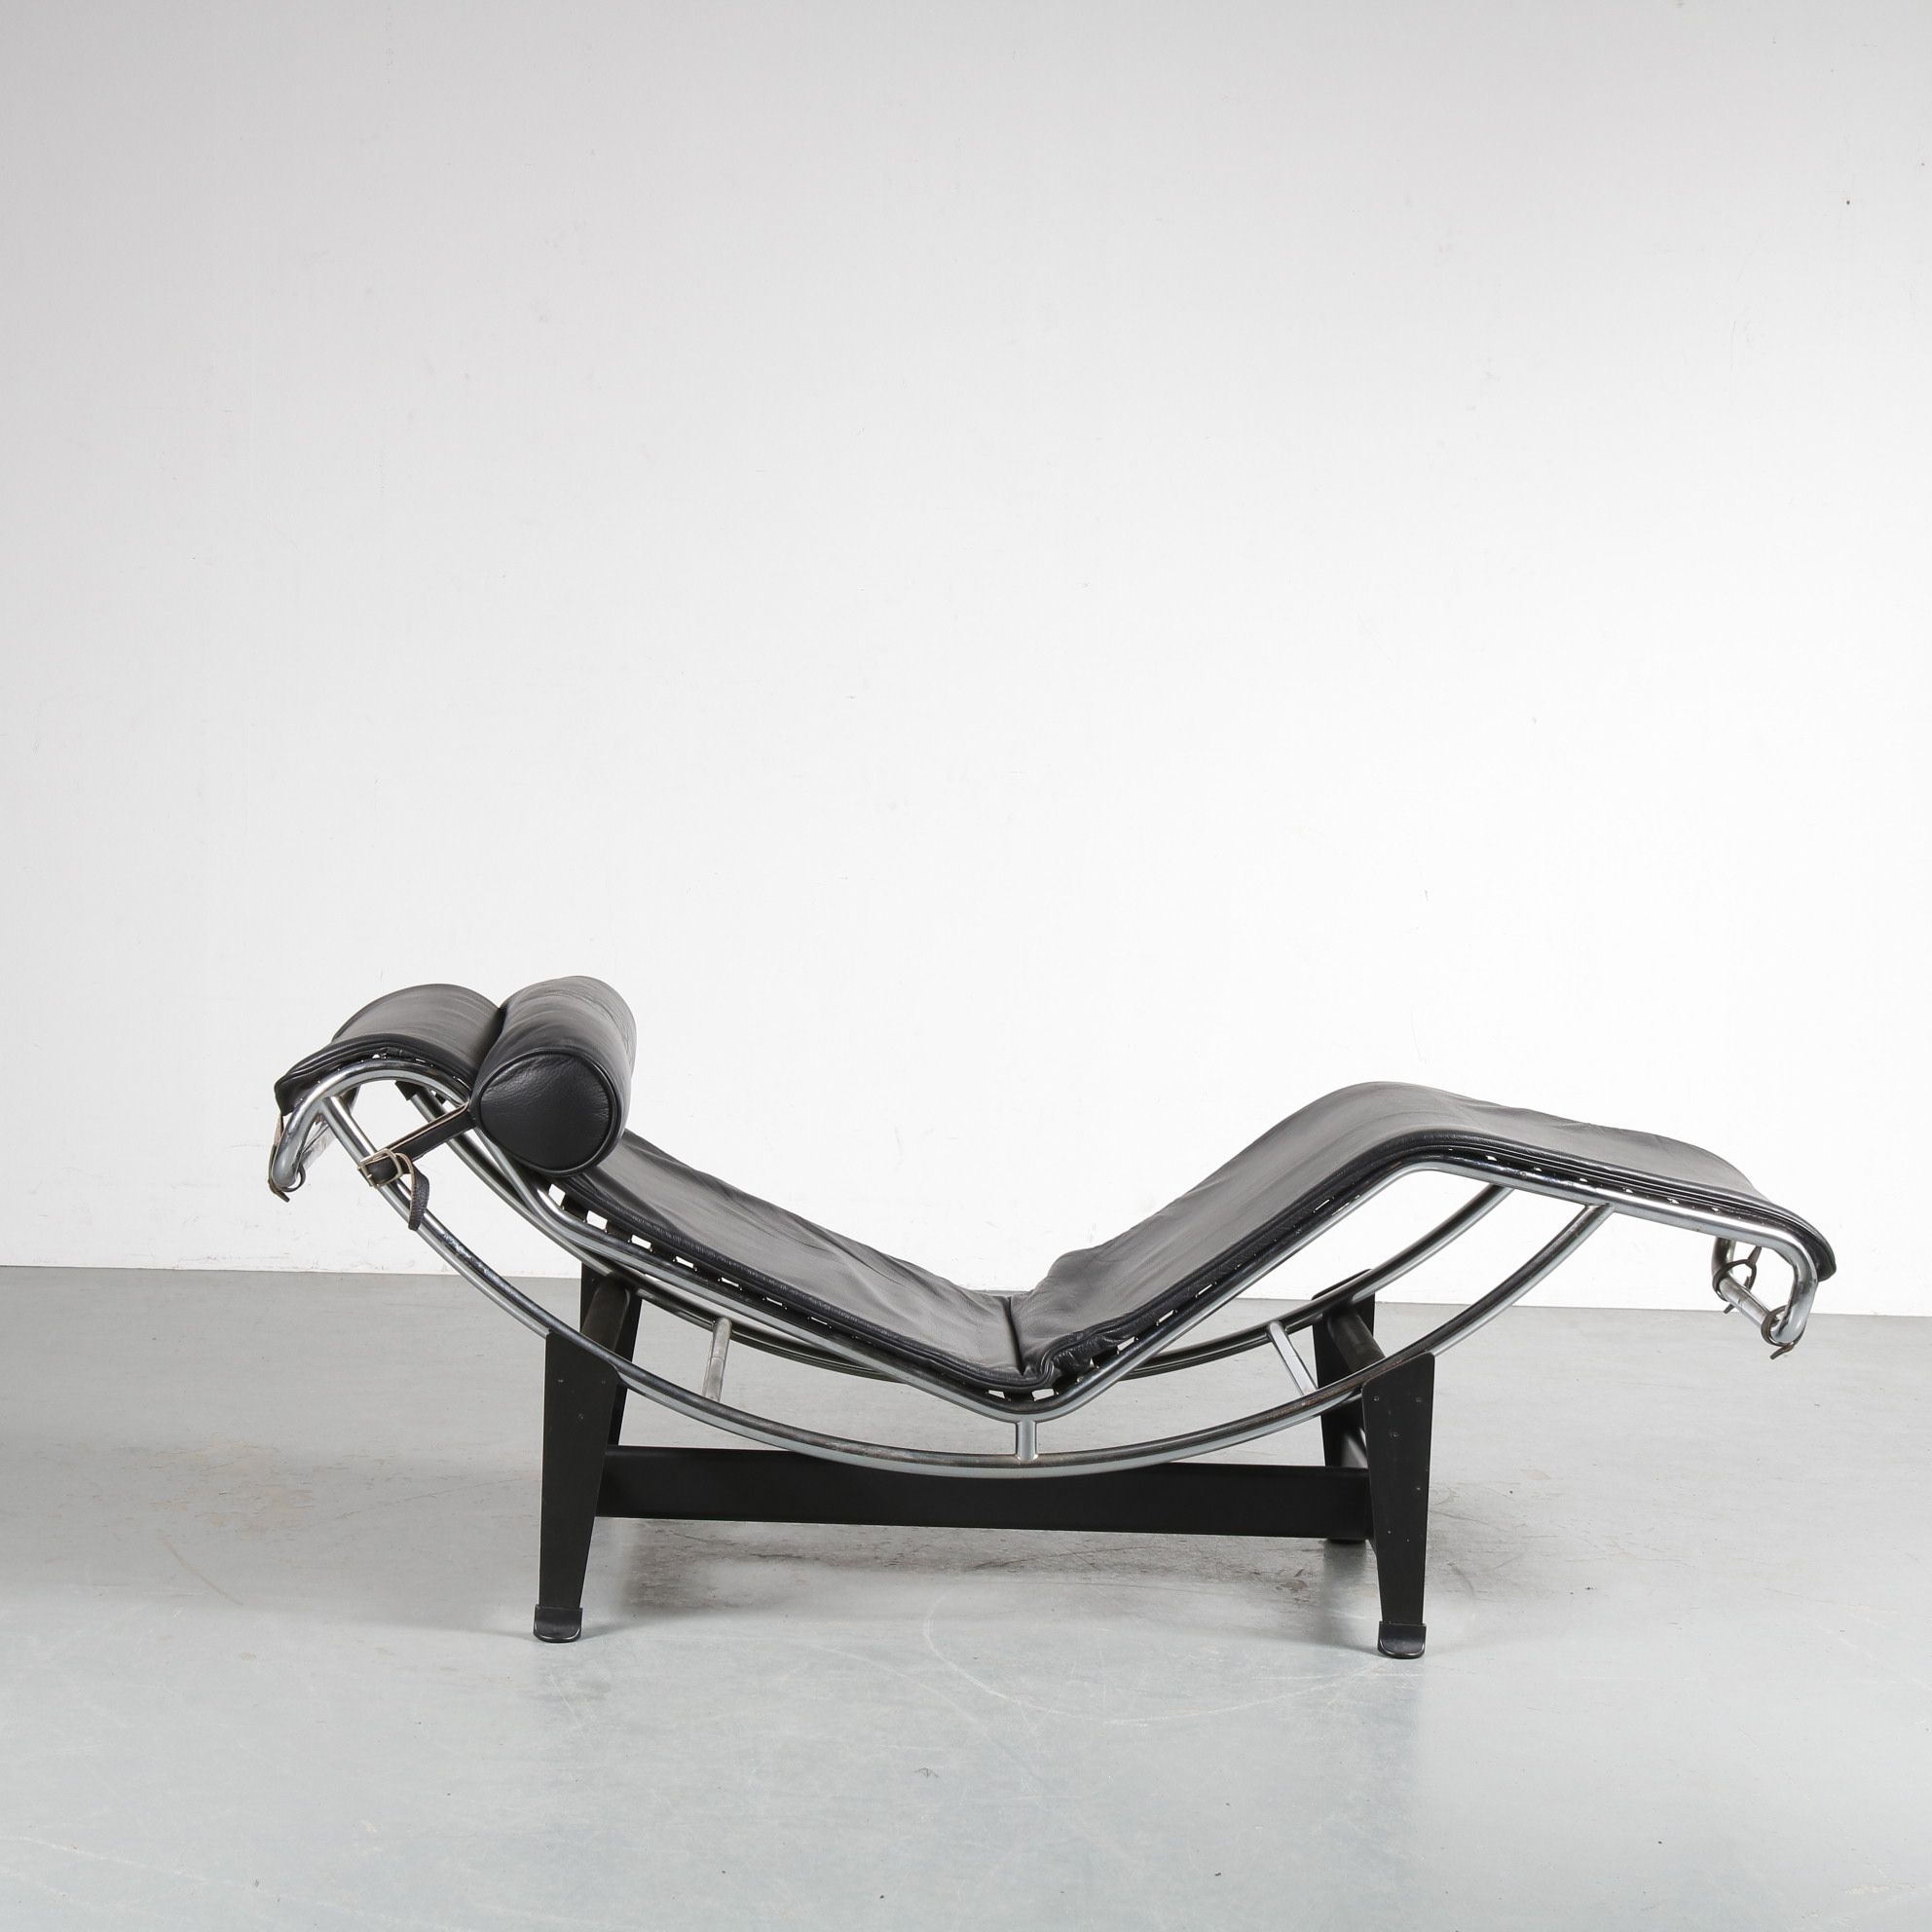 LC4 Chaise-Longue by Le Corbusier for Cassina, 1980s - Design